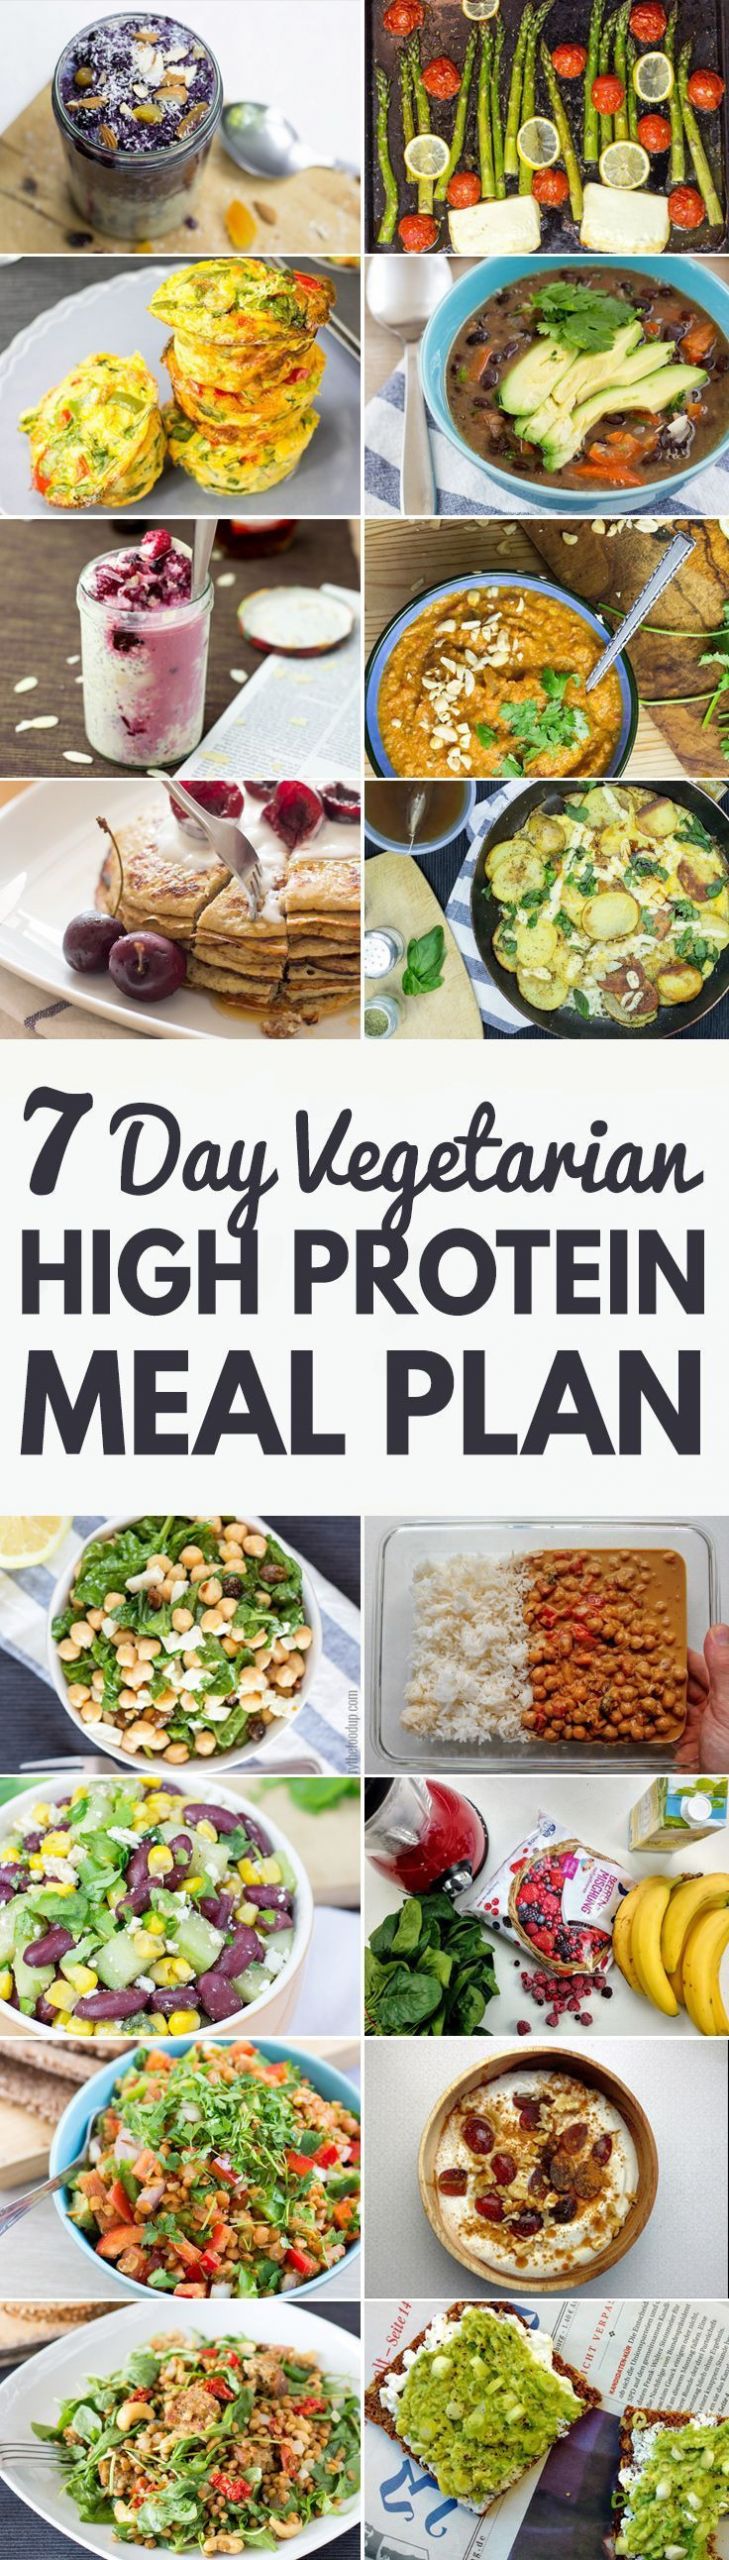 High Protein Vegan Diet Plan
 High Protein Ve arian Meal Plan – Build Muscle and Tone